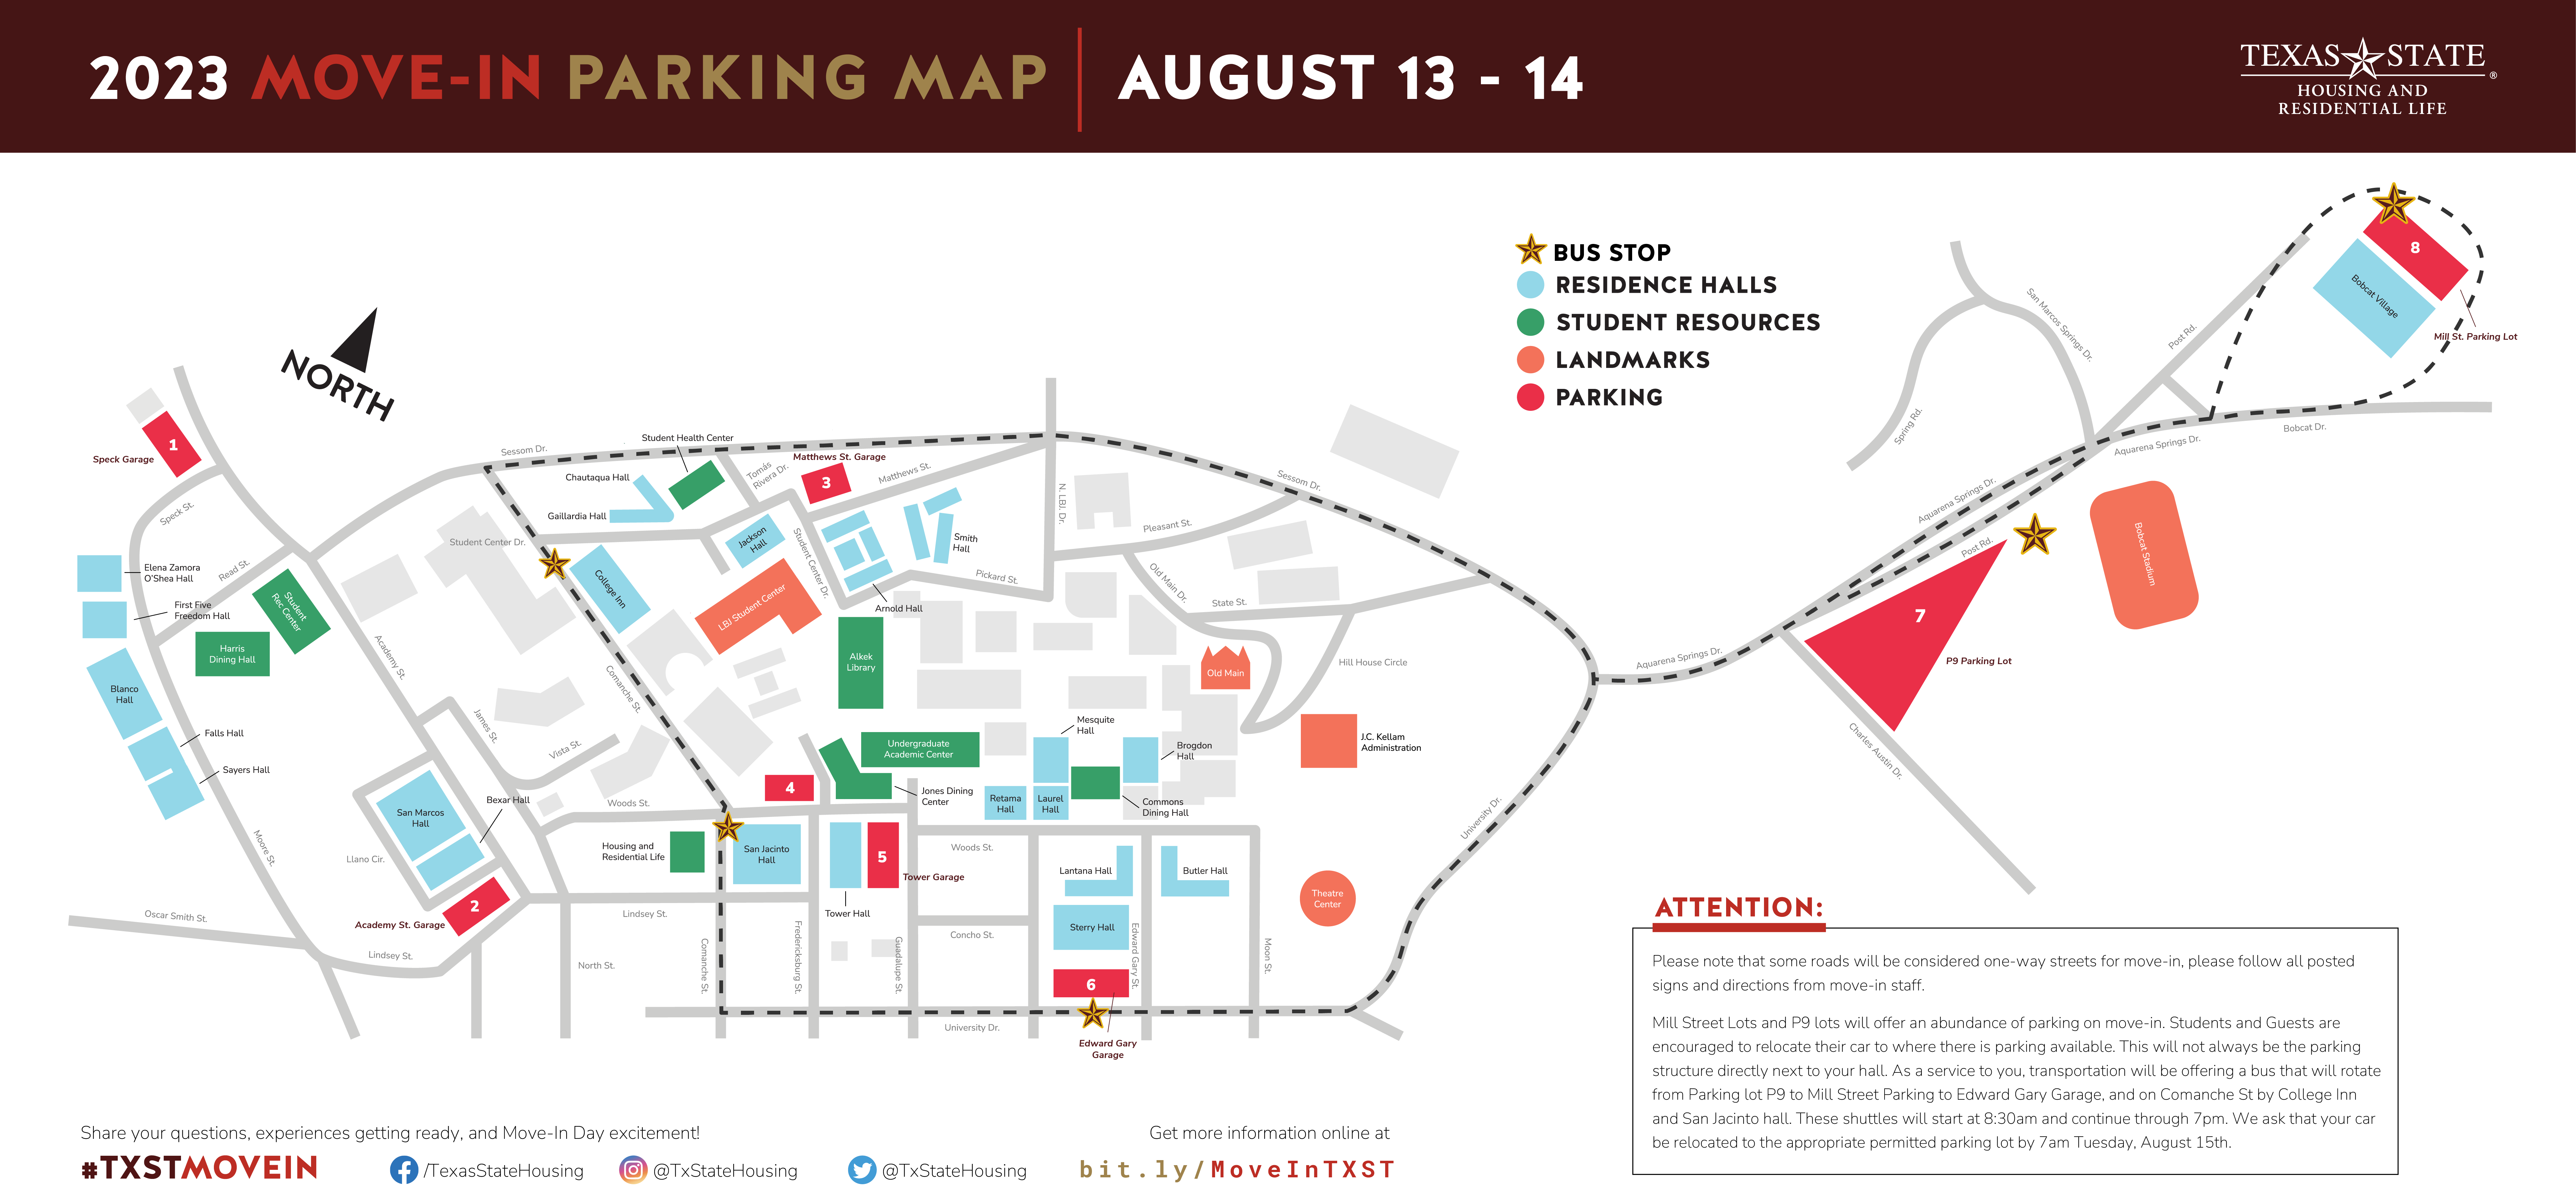 Parking Map of TXST Campus